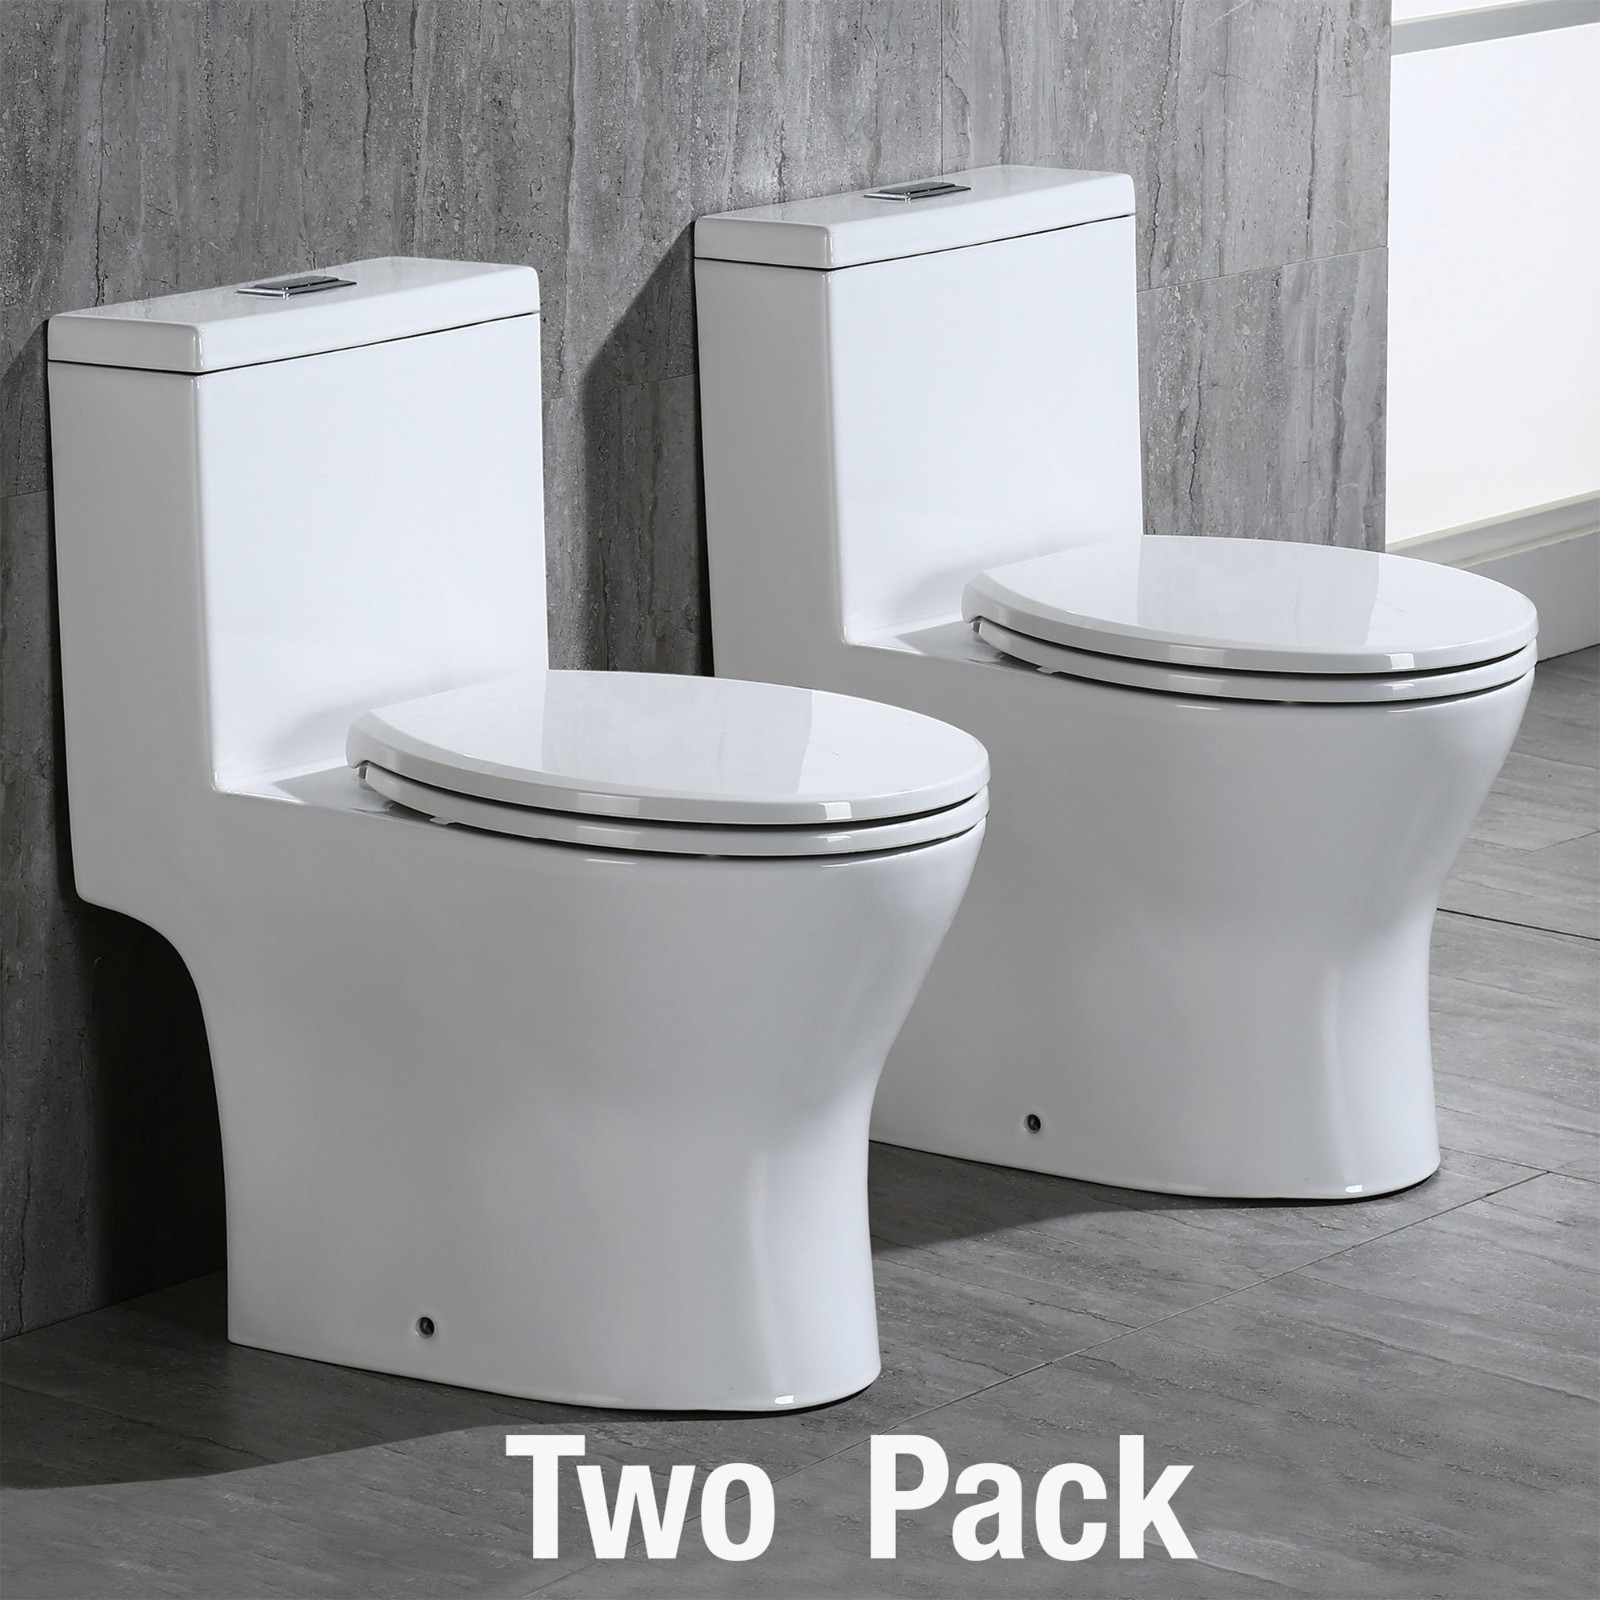  WOODBRIDGEBath T-0031 WOODBRIDGE T-0031 Short Compact Tiny One Piece Toilet with Soft Closing Seat, Small Toilet(2 -Pack)_6494